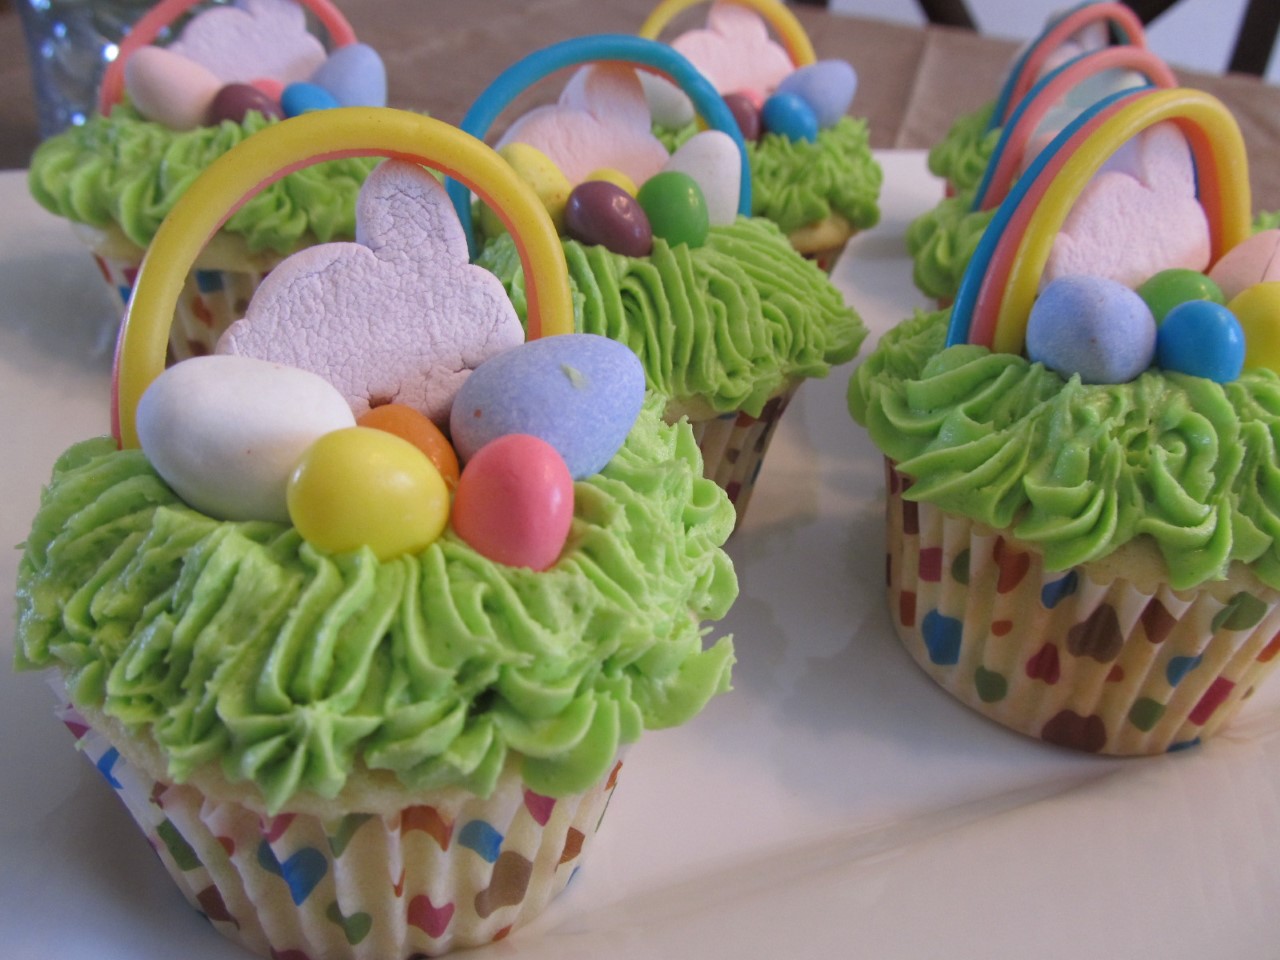 Cupcakes decorated with grass icing and rabbits